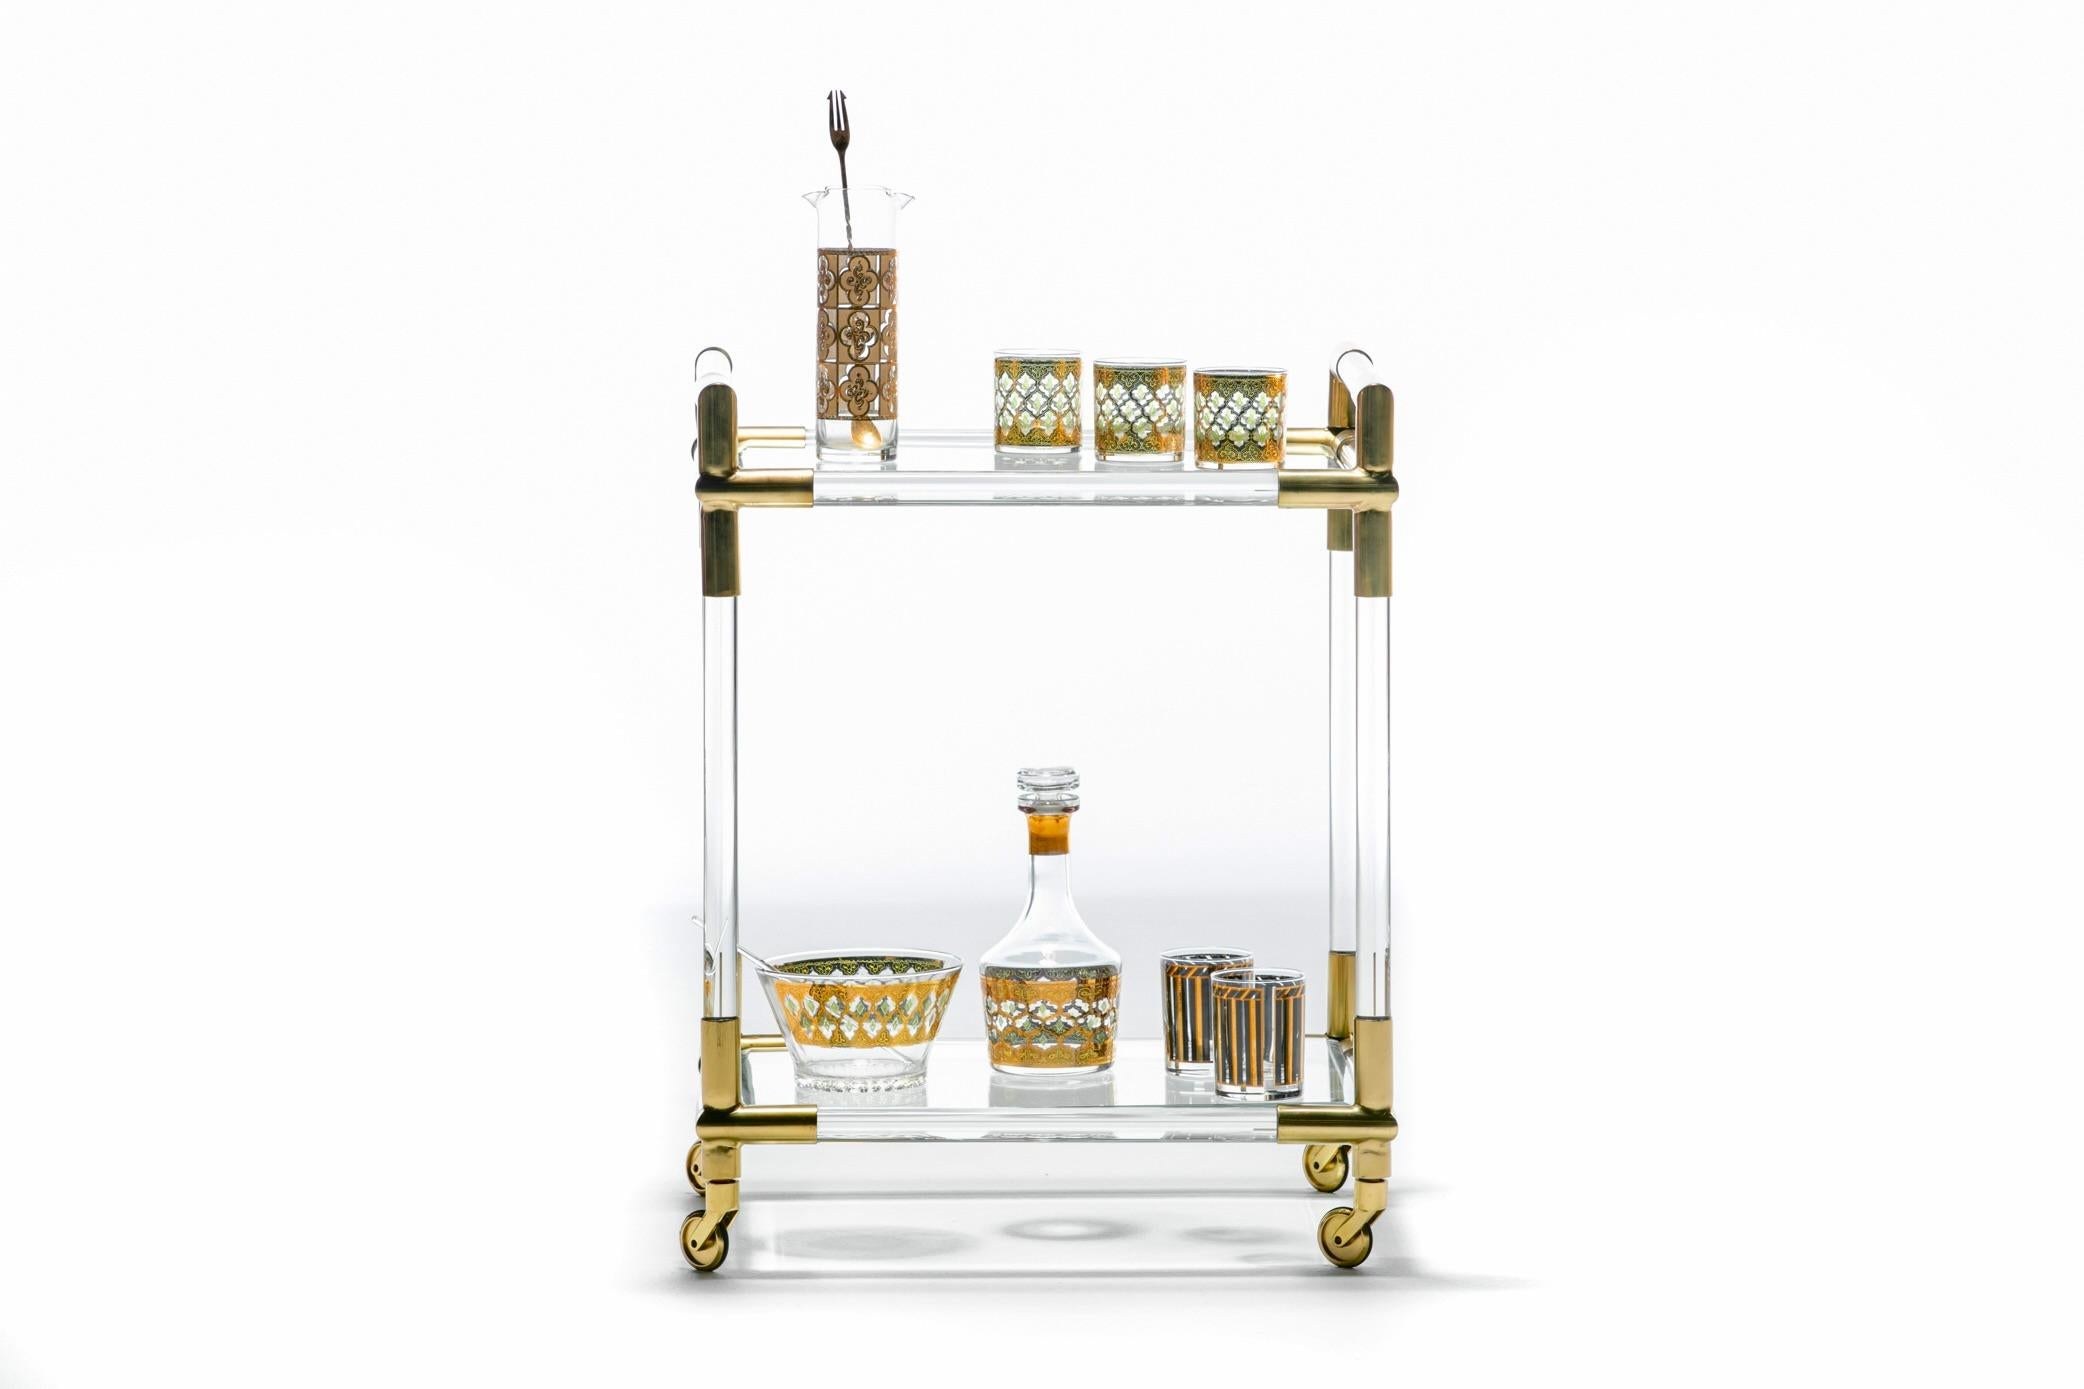 Strut into a chic home in Milan draped in gorgeous art and furnishings and you'd soon notice this beautiful Italian Lucite and Brass Bar Cart ready to serve afternoon cocktails in high style. Mamma mia! The look is chic. Sexy. Gucci. A sense of